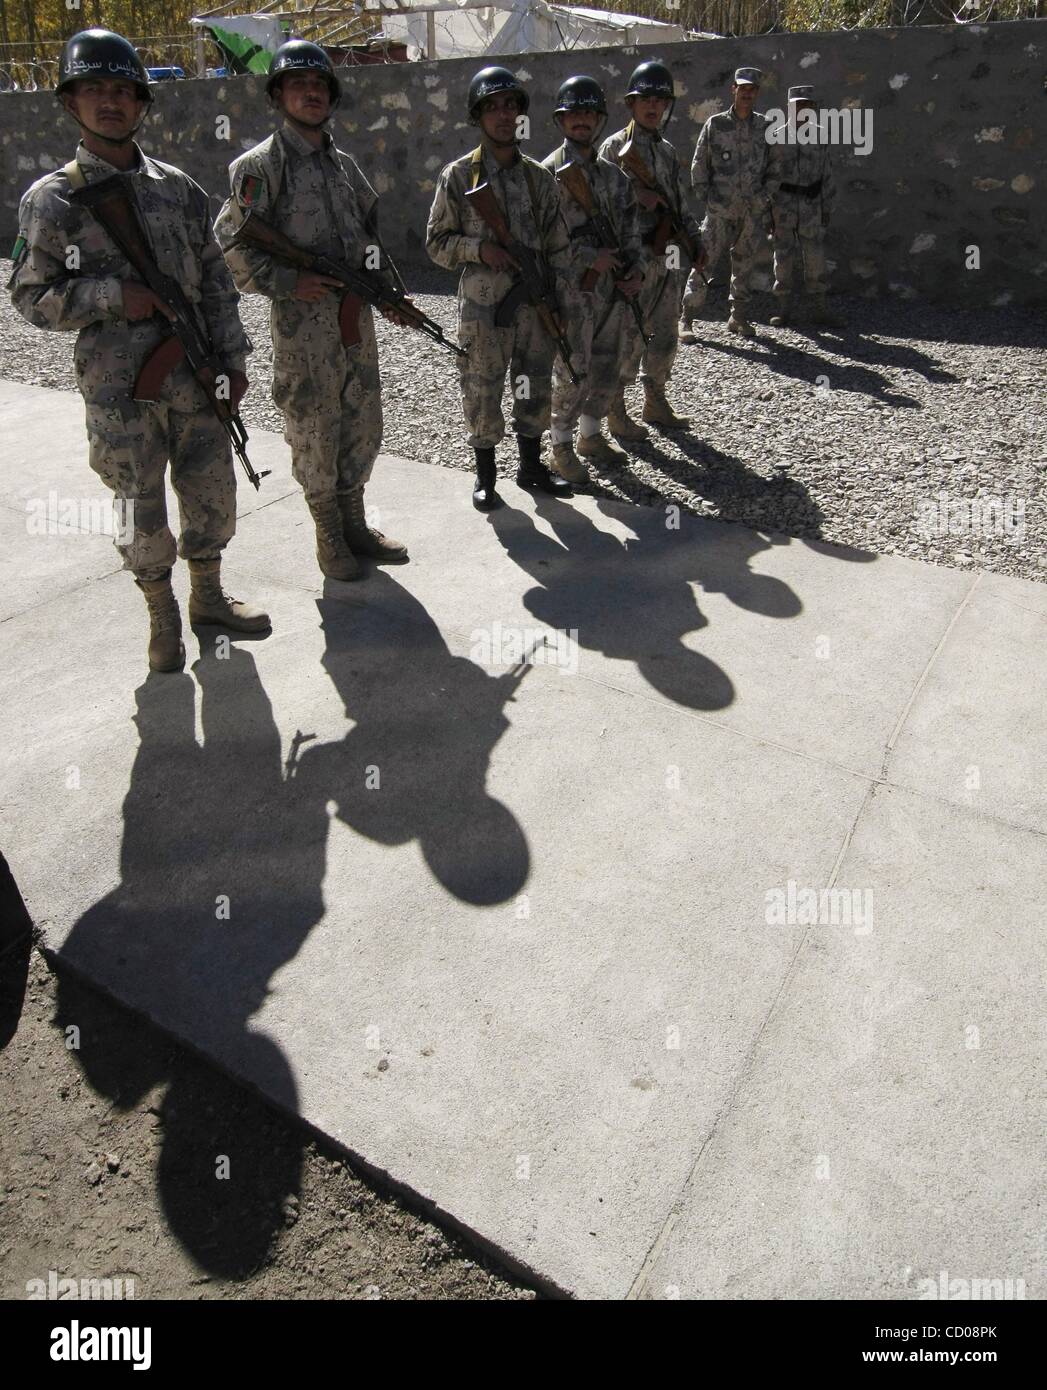 Oct 16, 2008 - Tadjik-Afghan border, Afghanistan - Afghan border doing their routine at the Tadjik-Afghan border. (Credit Image: Â© PhotoXpress/ZUMA Press) RESTRICTIONS: * North and South America Rights Only * Stock Photo